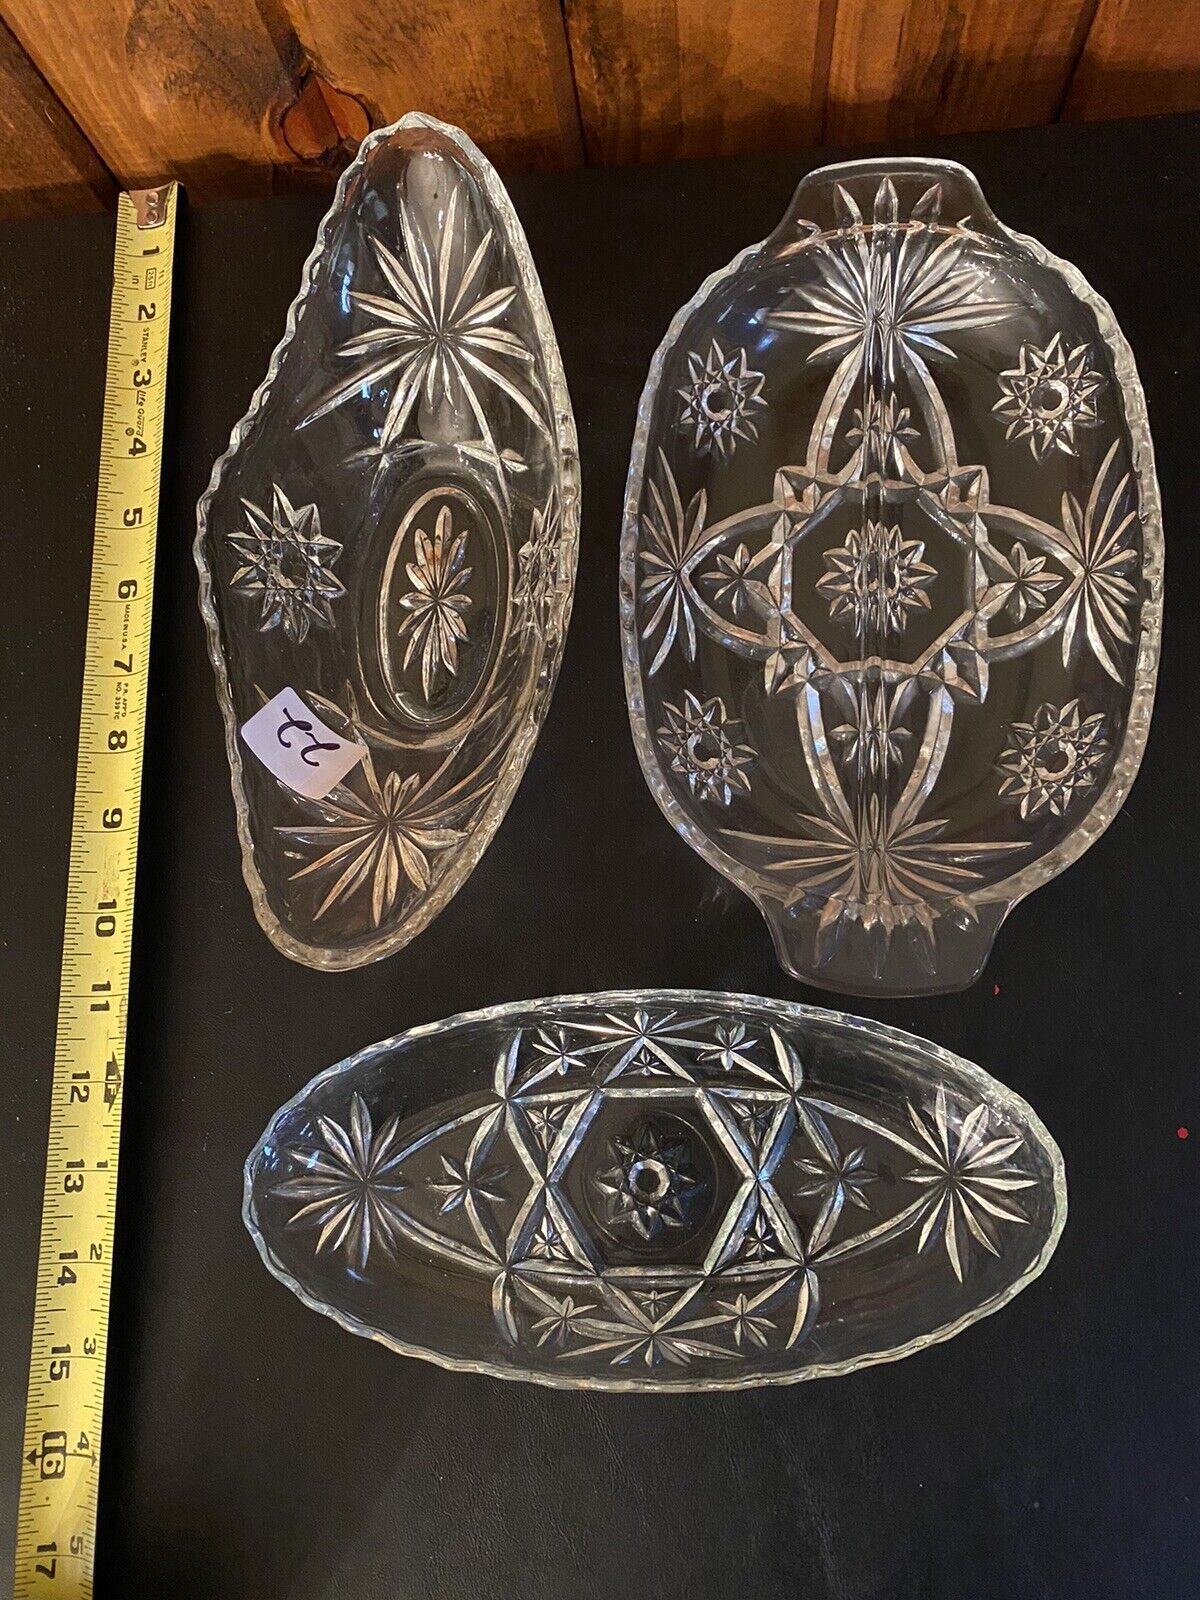 3 Vtg Anchor Hocking EAPC Star of David Oval Relish Dishes Clear Pressed Glass